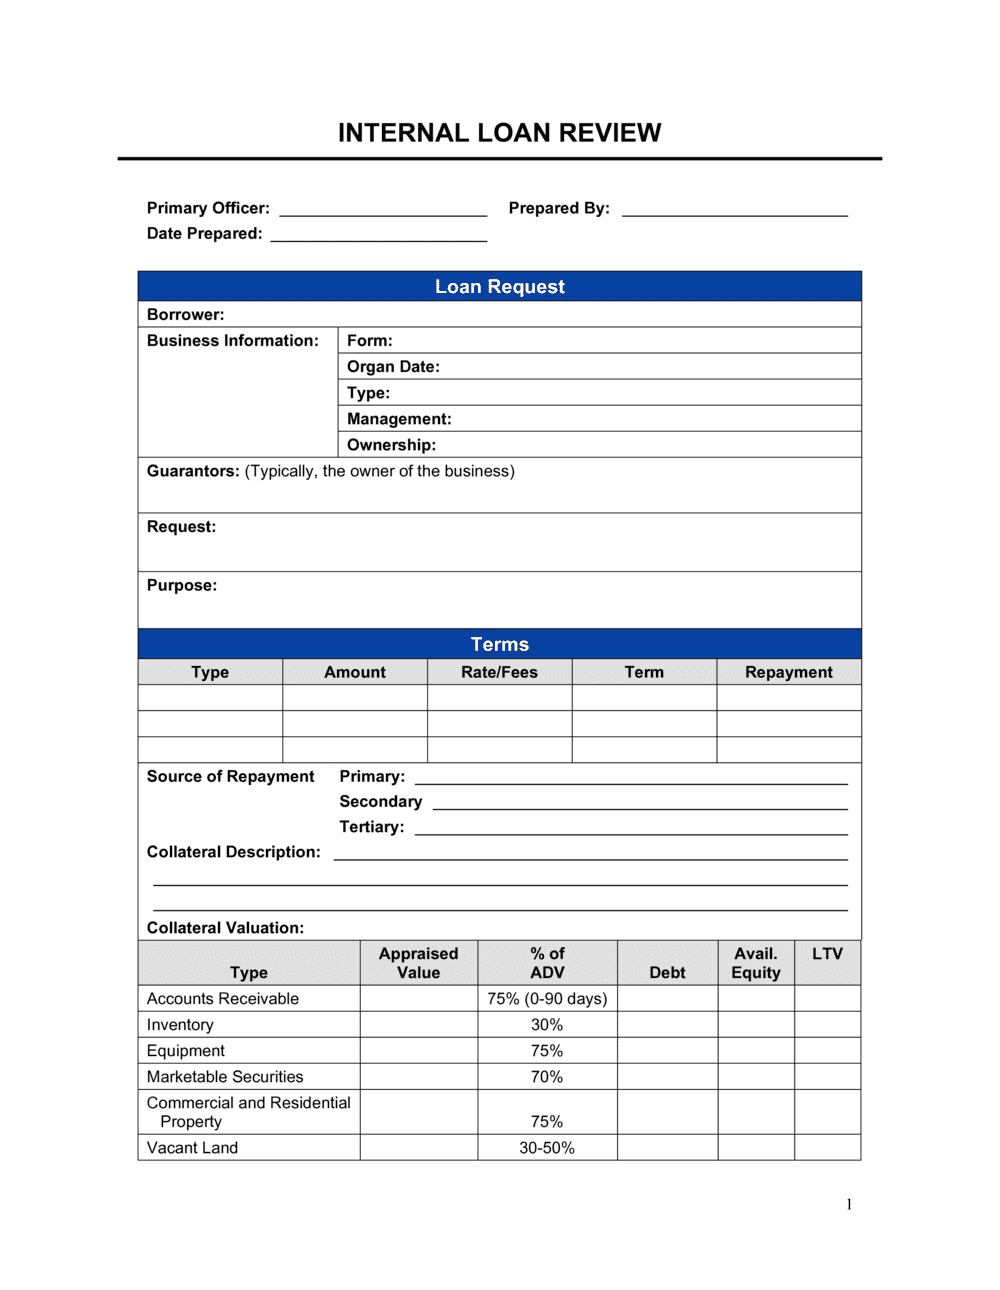 Loan Application Review Form Template by Business in a Box™